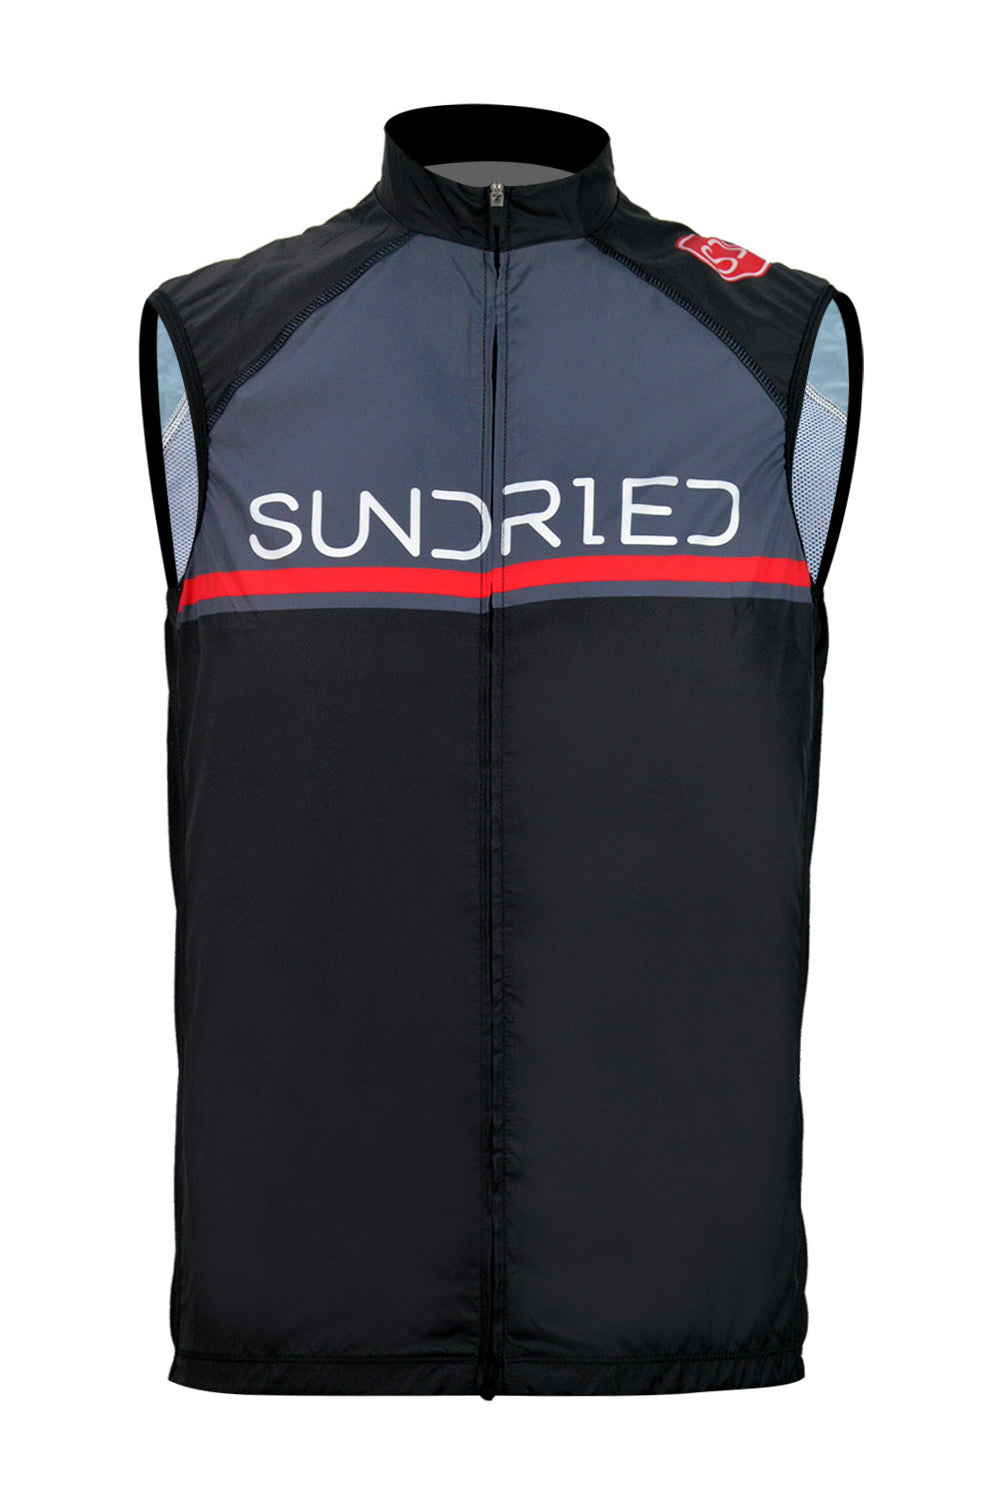 Sundried Cadence Cycling and Running Gilet Gilet XS Black SD0128 XS Black Activewear